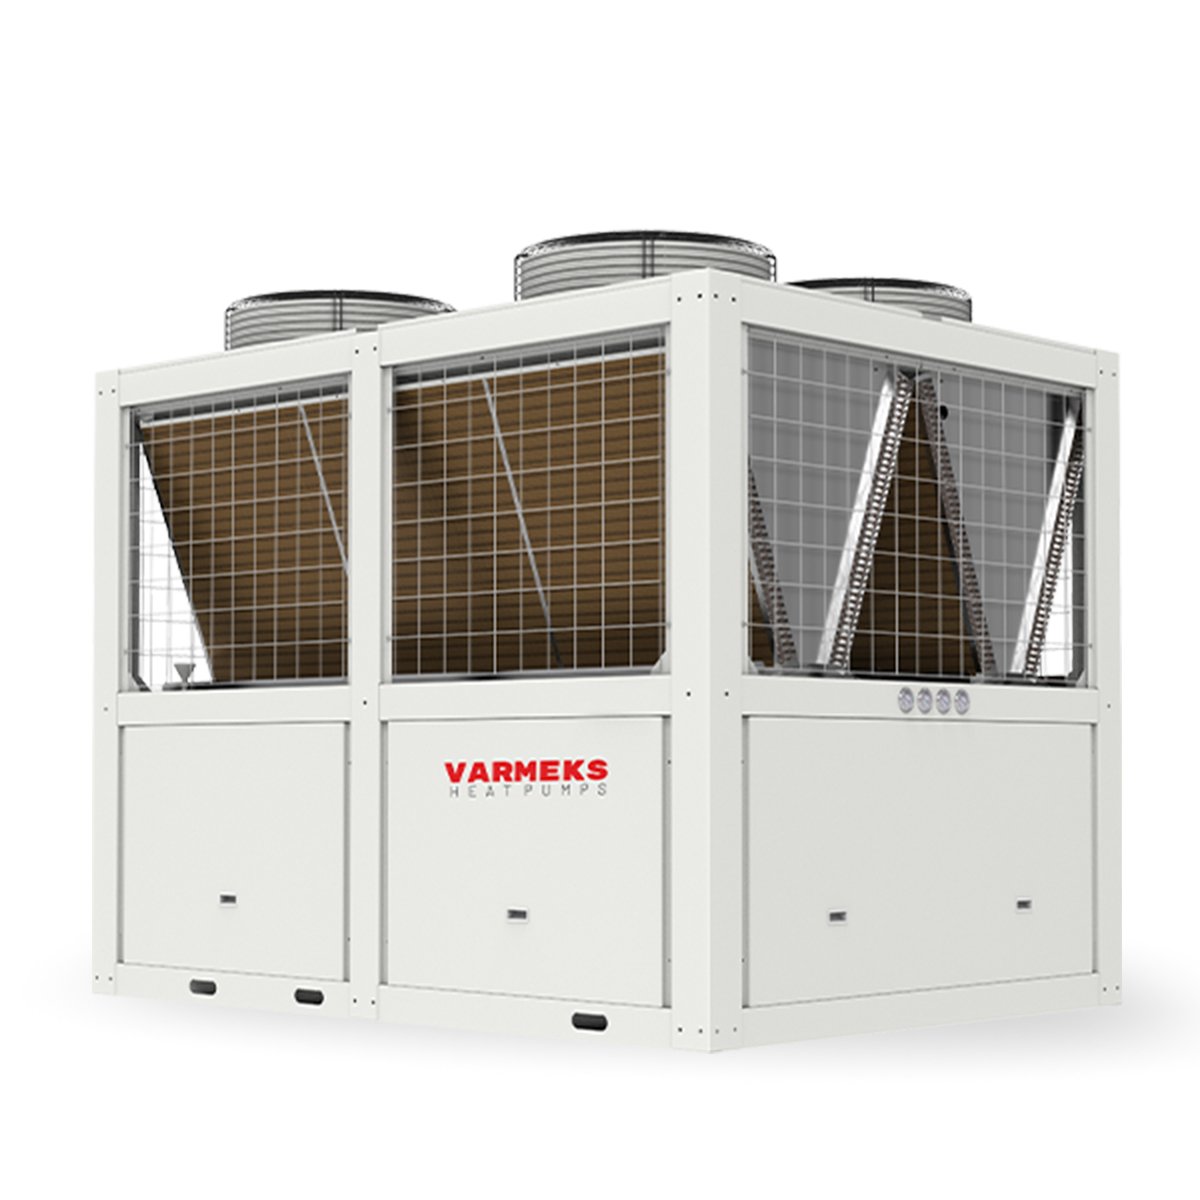 Varm Commercial Duo Series 288 kW